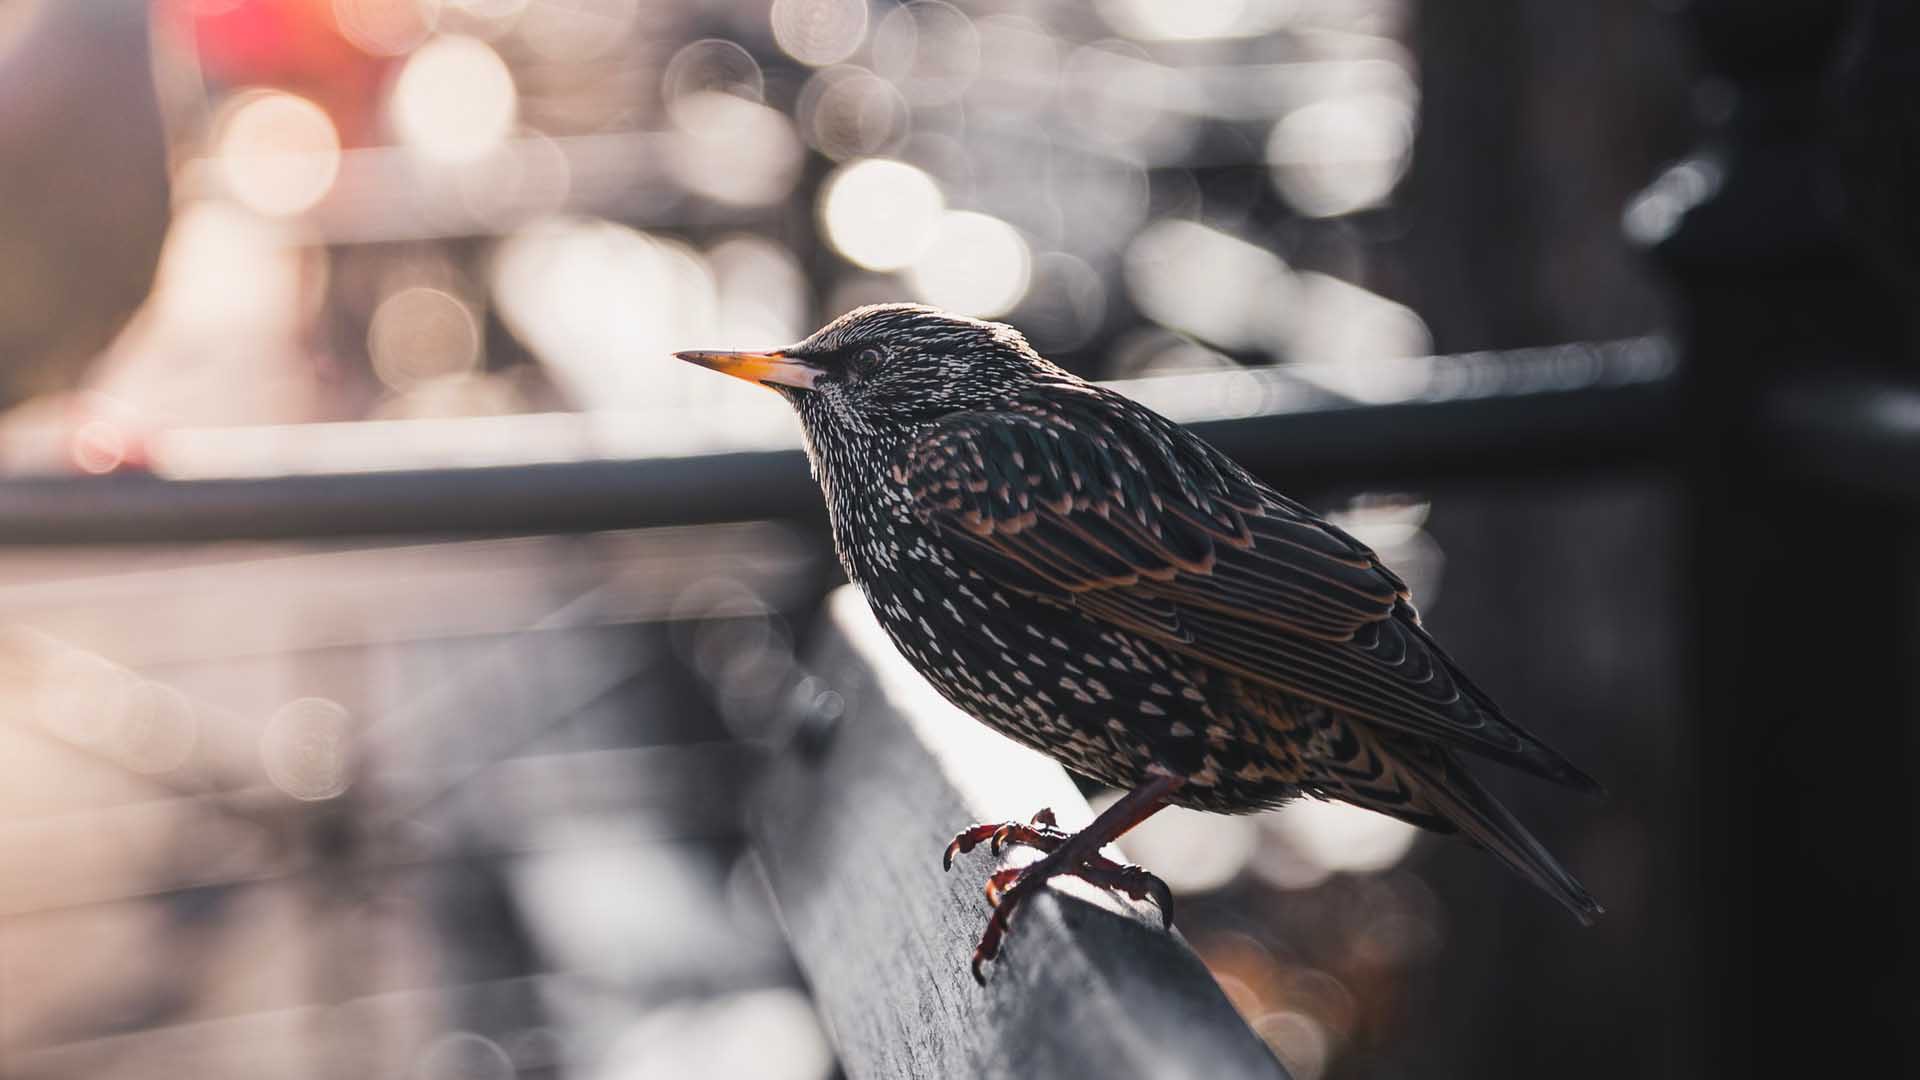 What is depth of field bokeh balls with bird in foreground